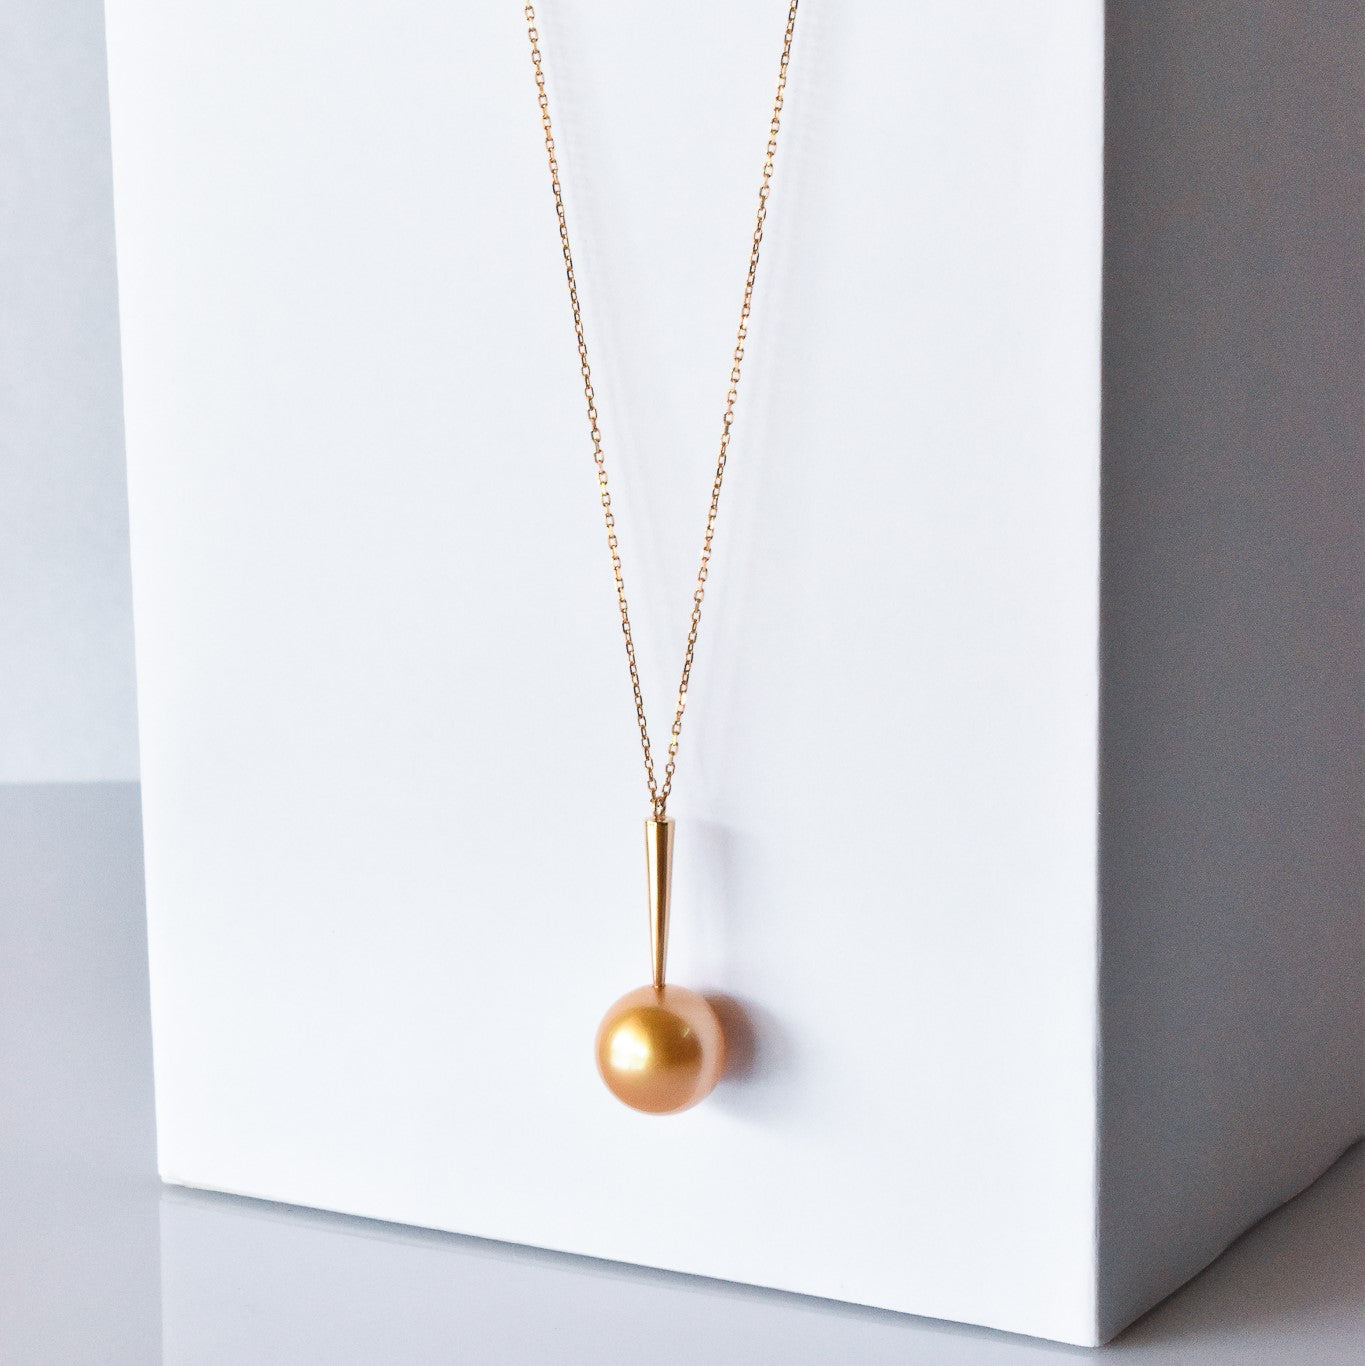 Golden South Sea Pearl Pendant Necklace set in 18K Yellow Gold